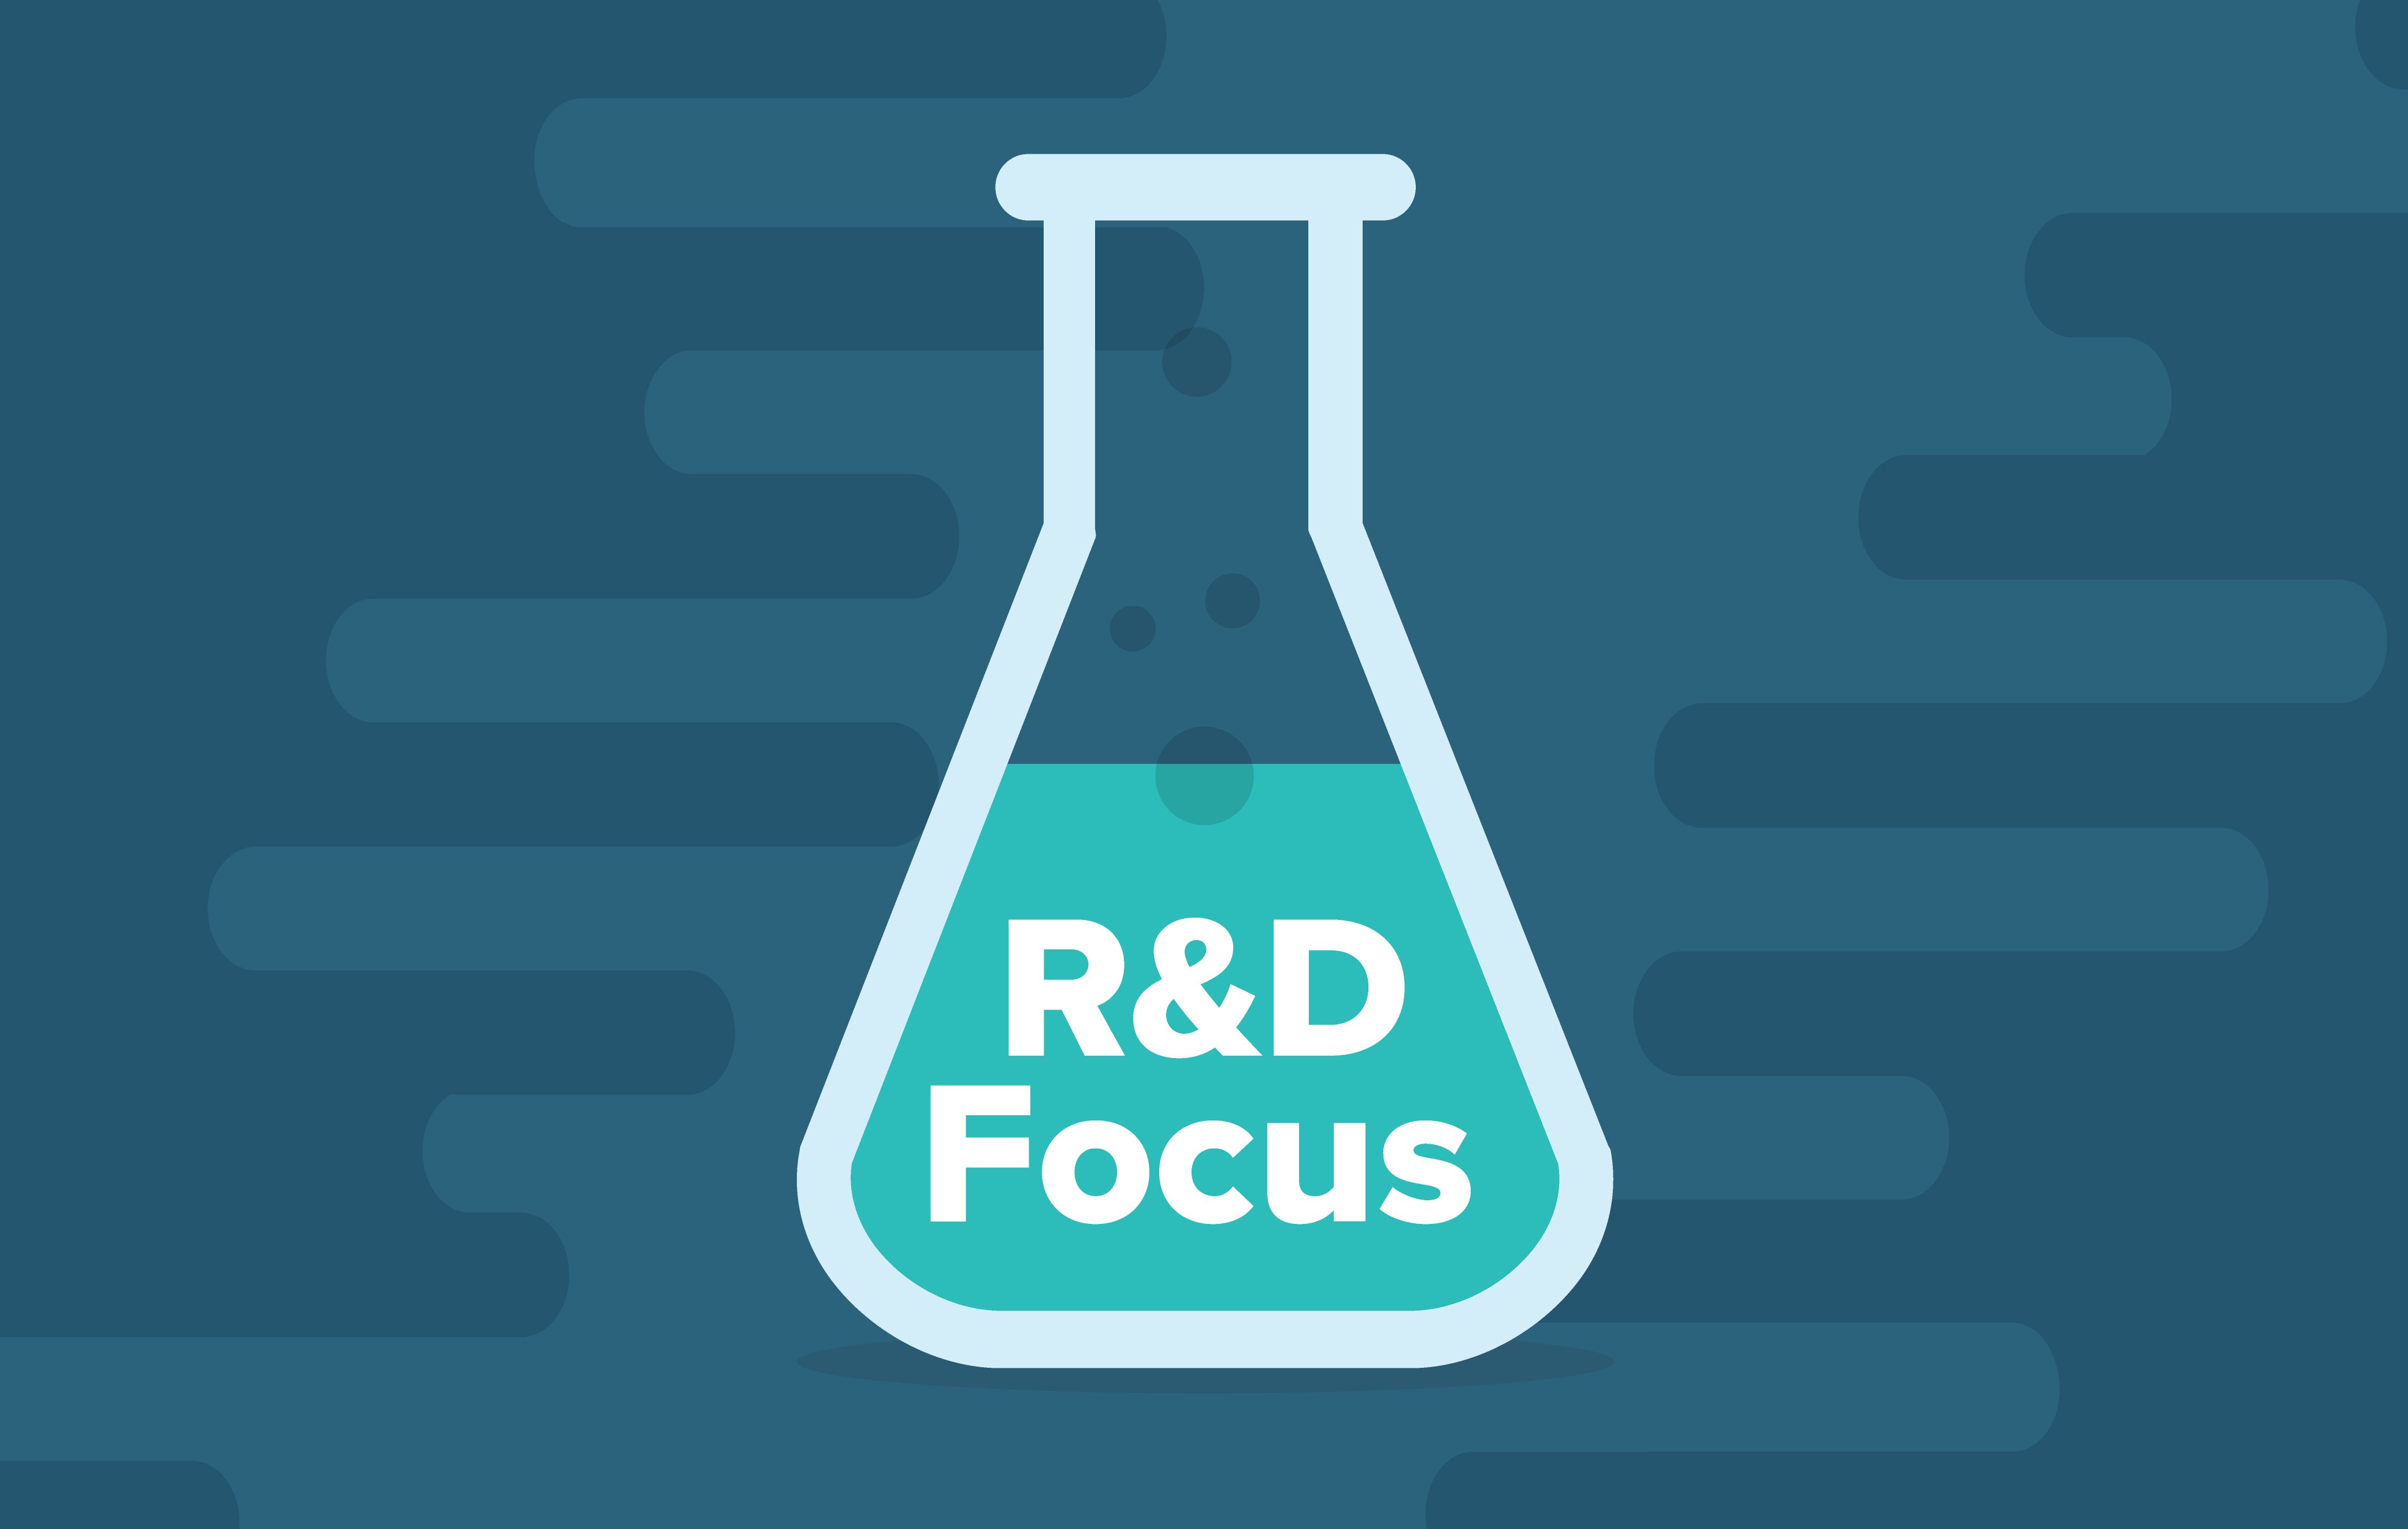 rd-focus-four-ways-the-biopharmaceutical-leads-in-delivering-new-treatments-and-cures